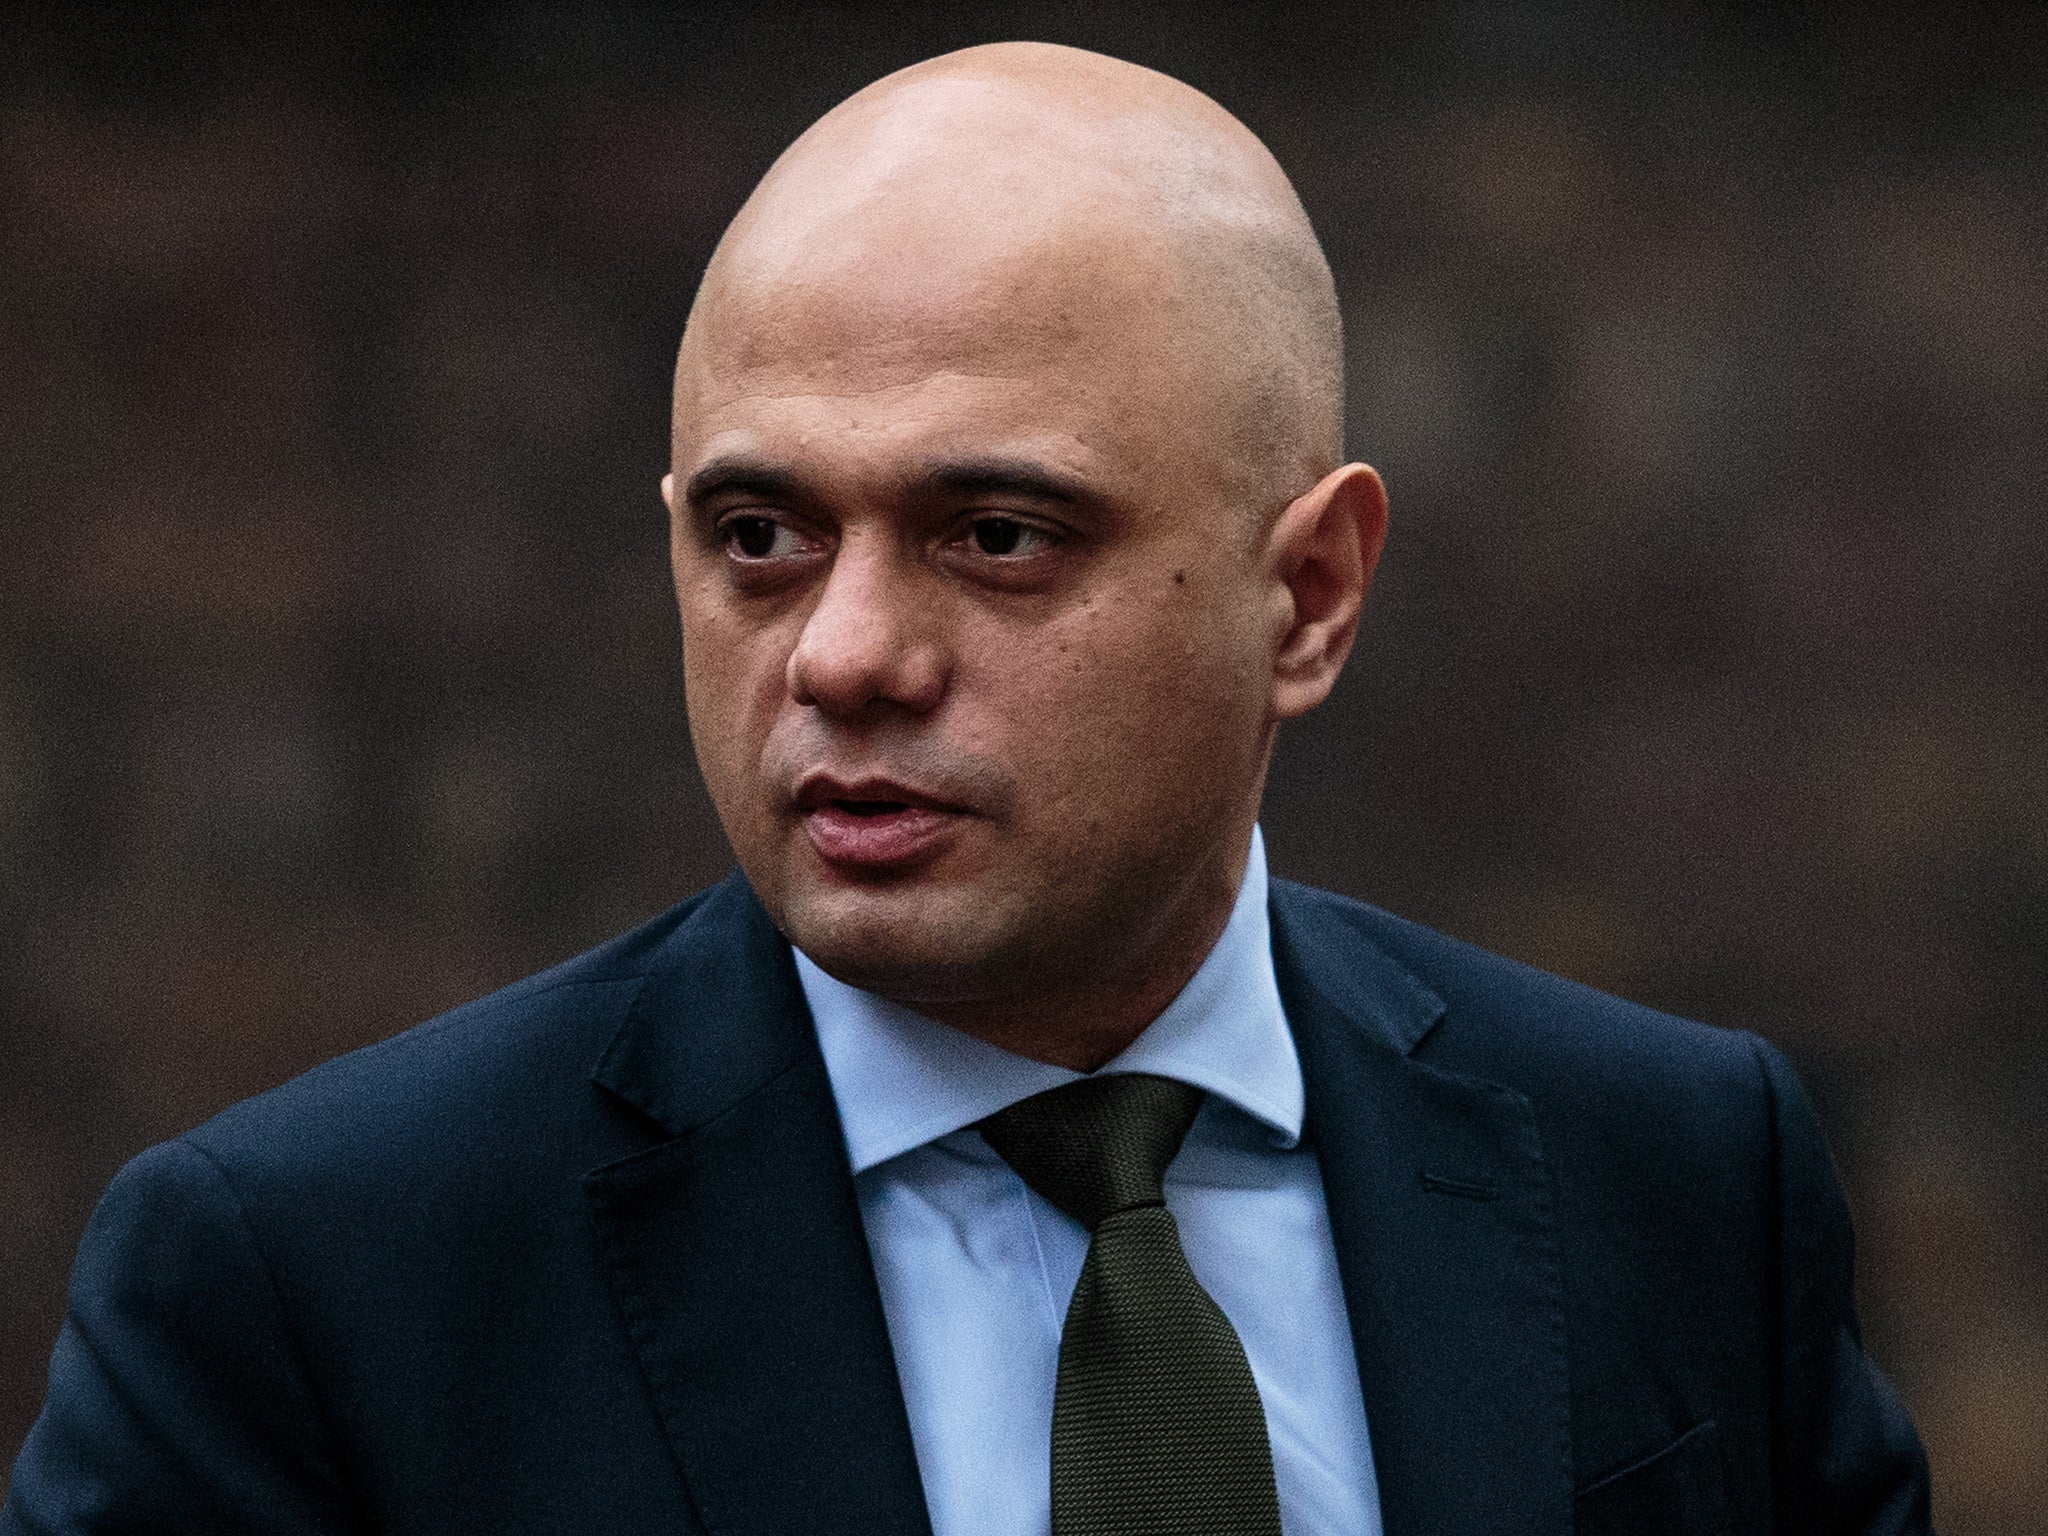 Critics say Sajid Javid has taken ‘easy way out’?by using power against Shamima Begum